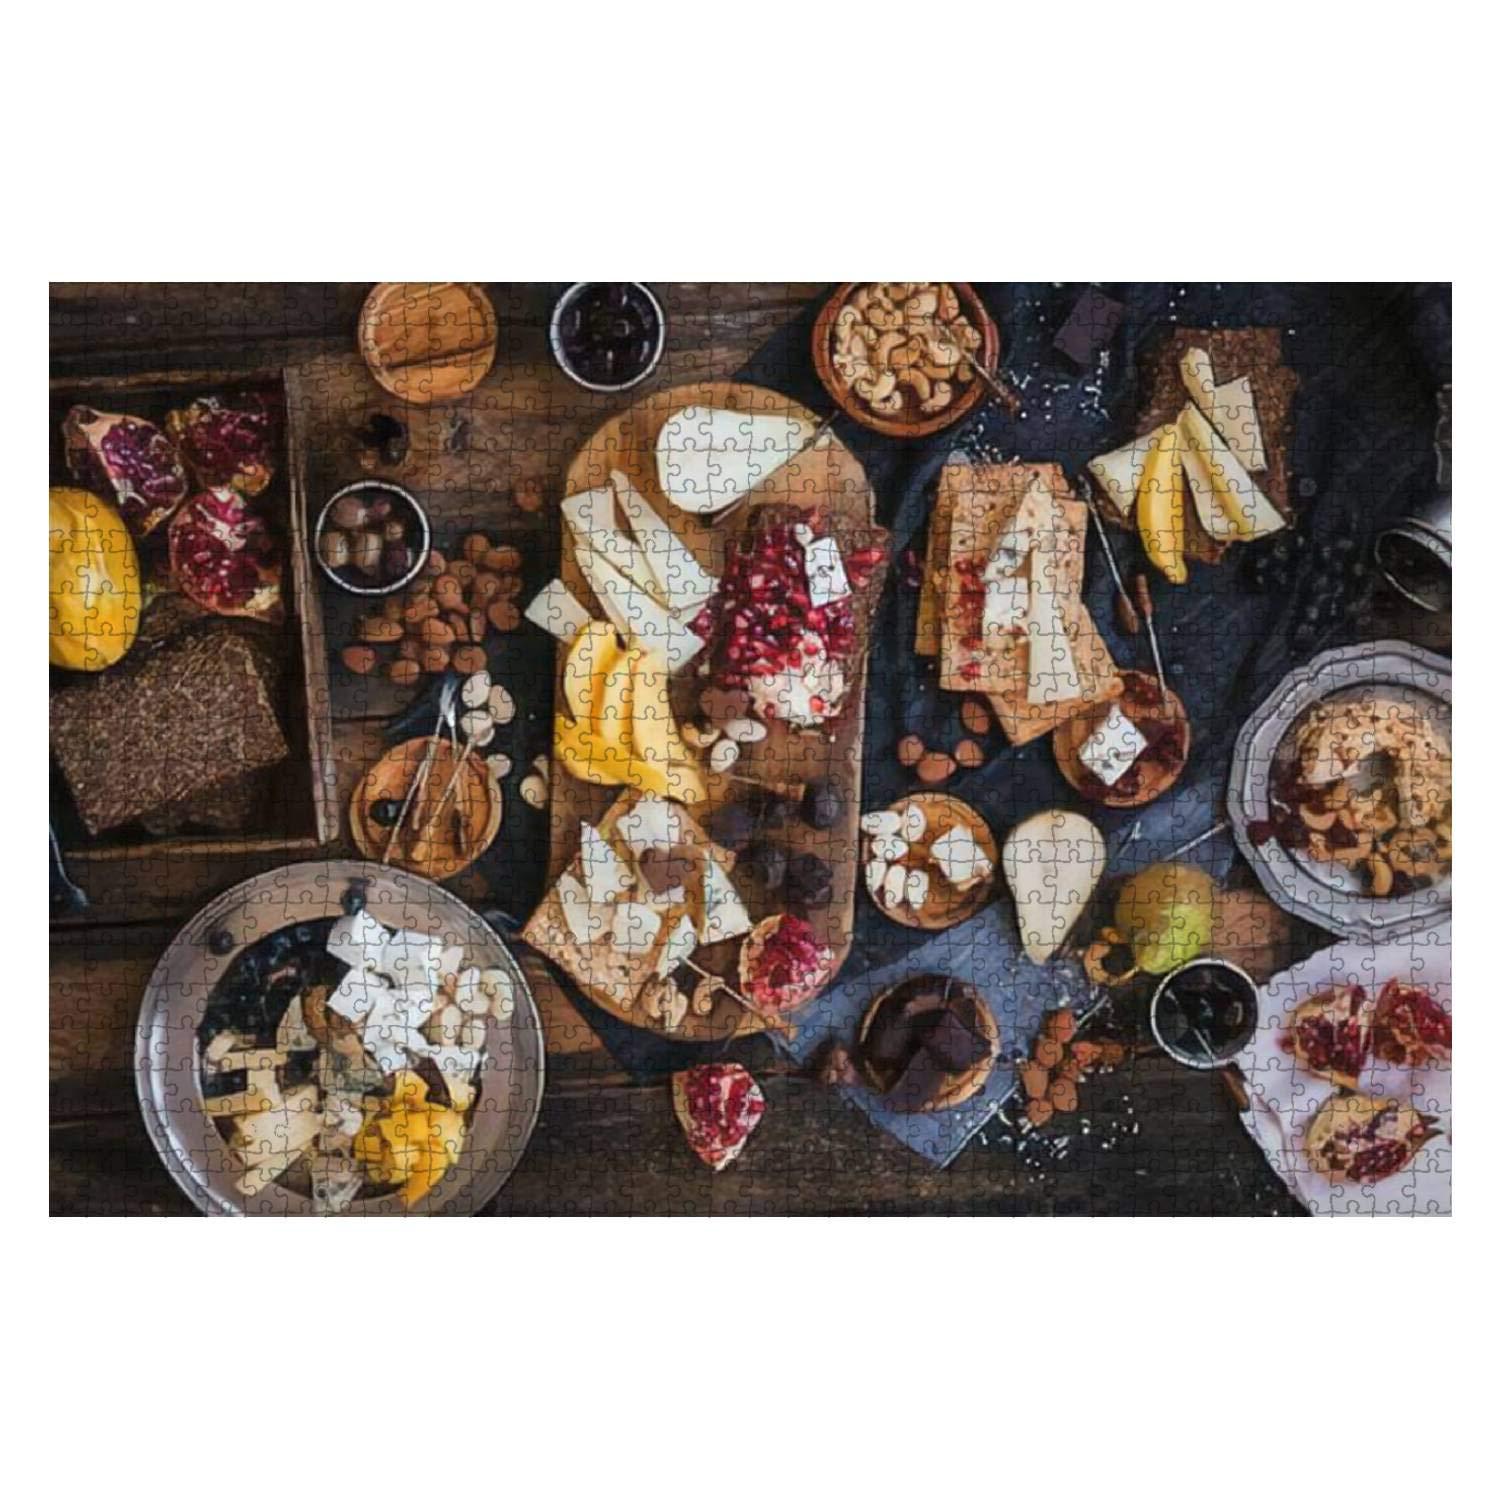 beescool jigsaw puzzles appetizers table cheese variety board with tropical fruits nuts and for kids adults educational intellectual g